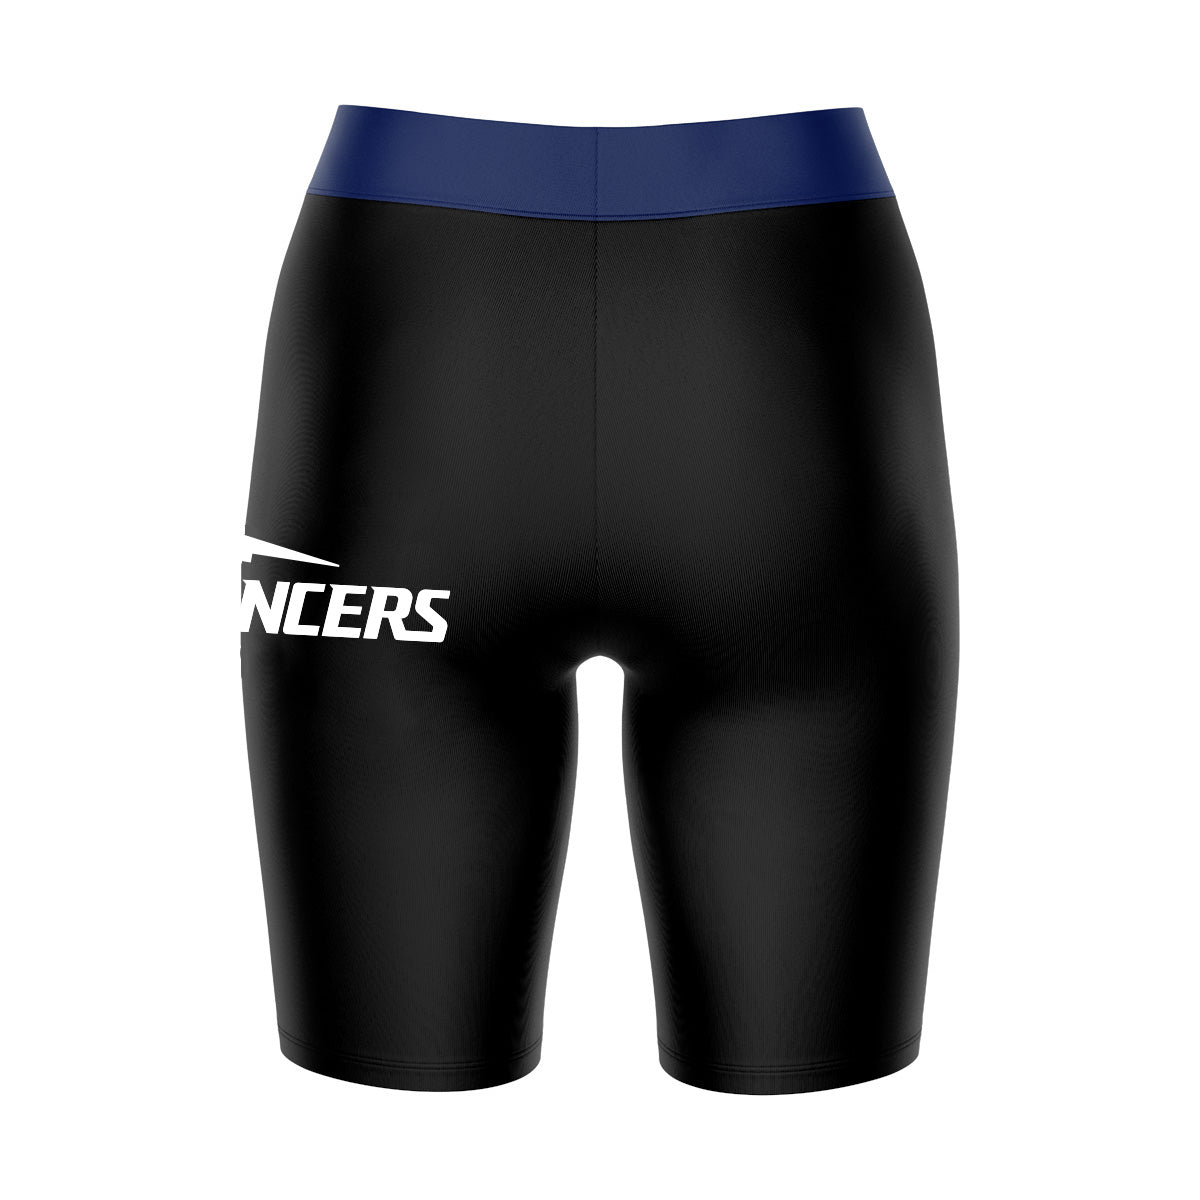 Cal Baptist Lancers CBU Vive La Fete Game Day Logo on Thigh and Waistband Black and Navy Women Bike Short 9 Inseam"